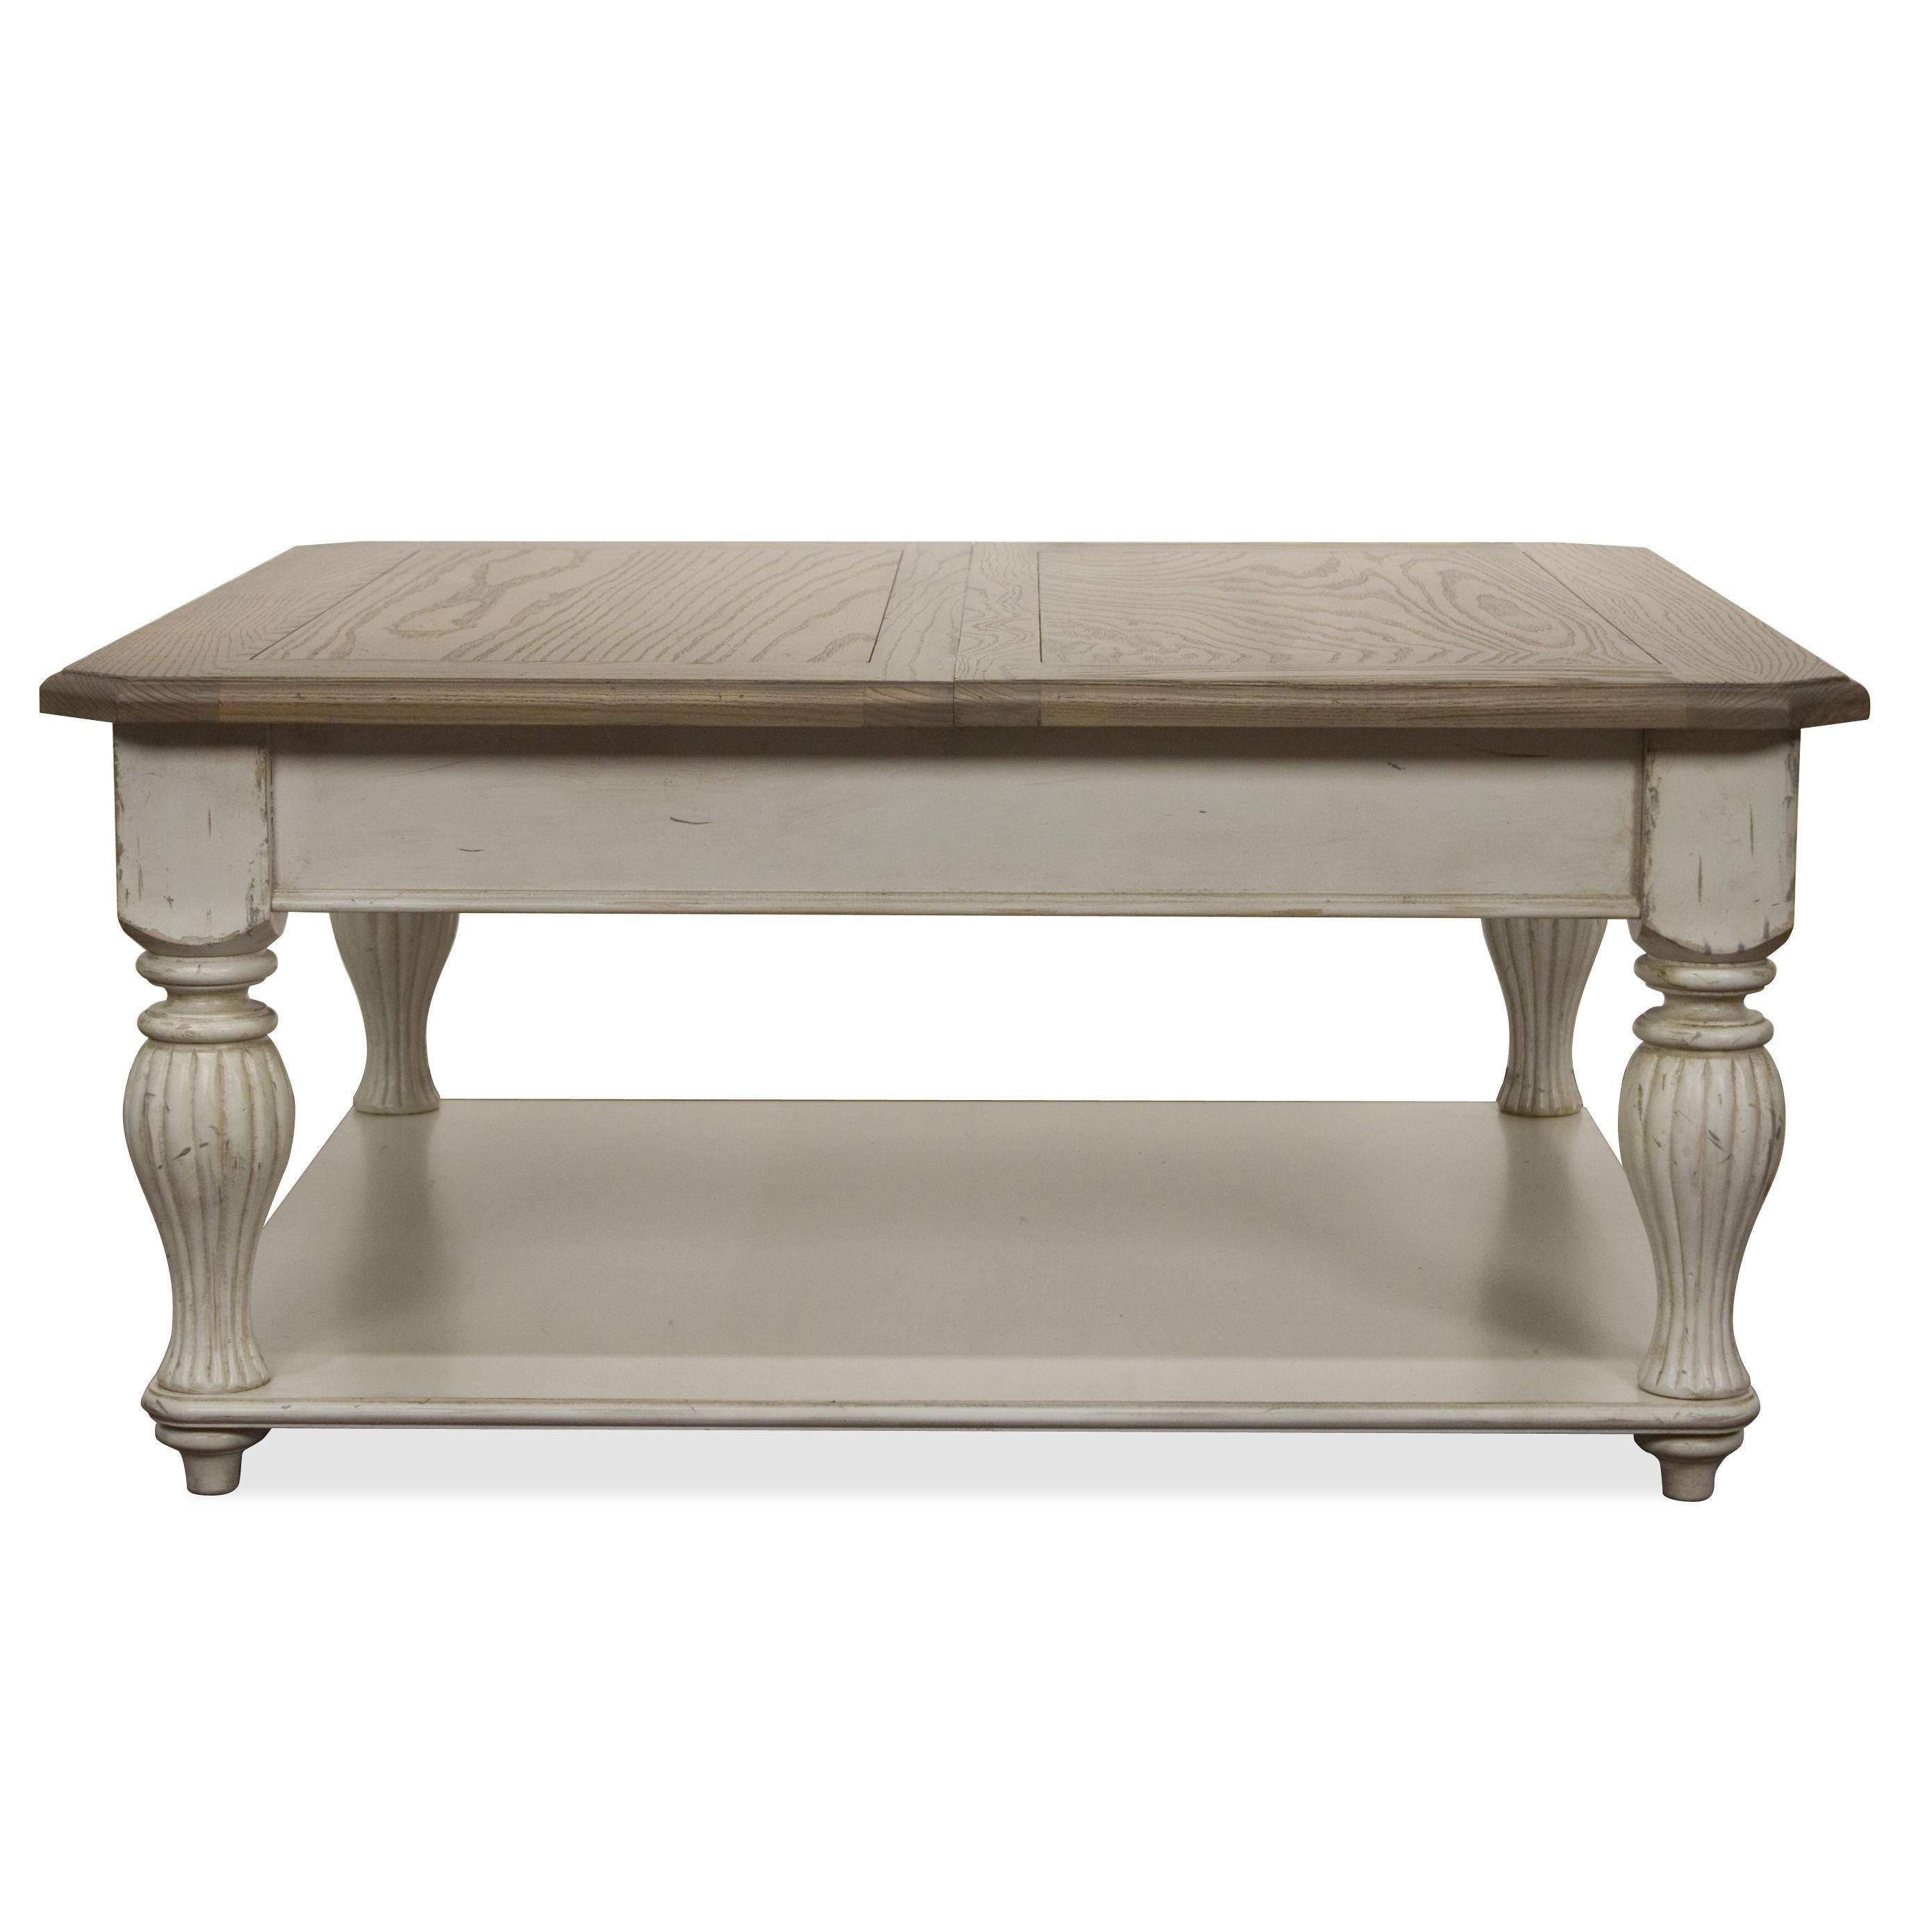 Coffee Table: Simple White Wood Coffee Table Designs Solid Wood Inside White Square Coffee Table (View 11 of 30)